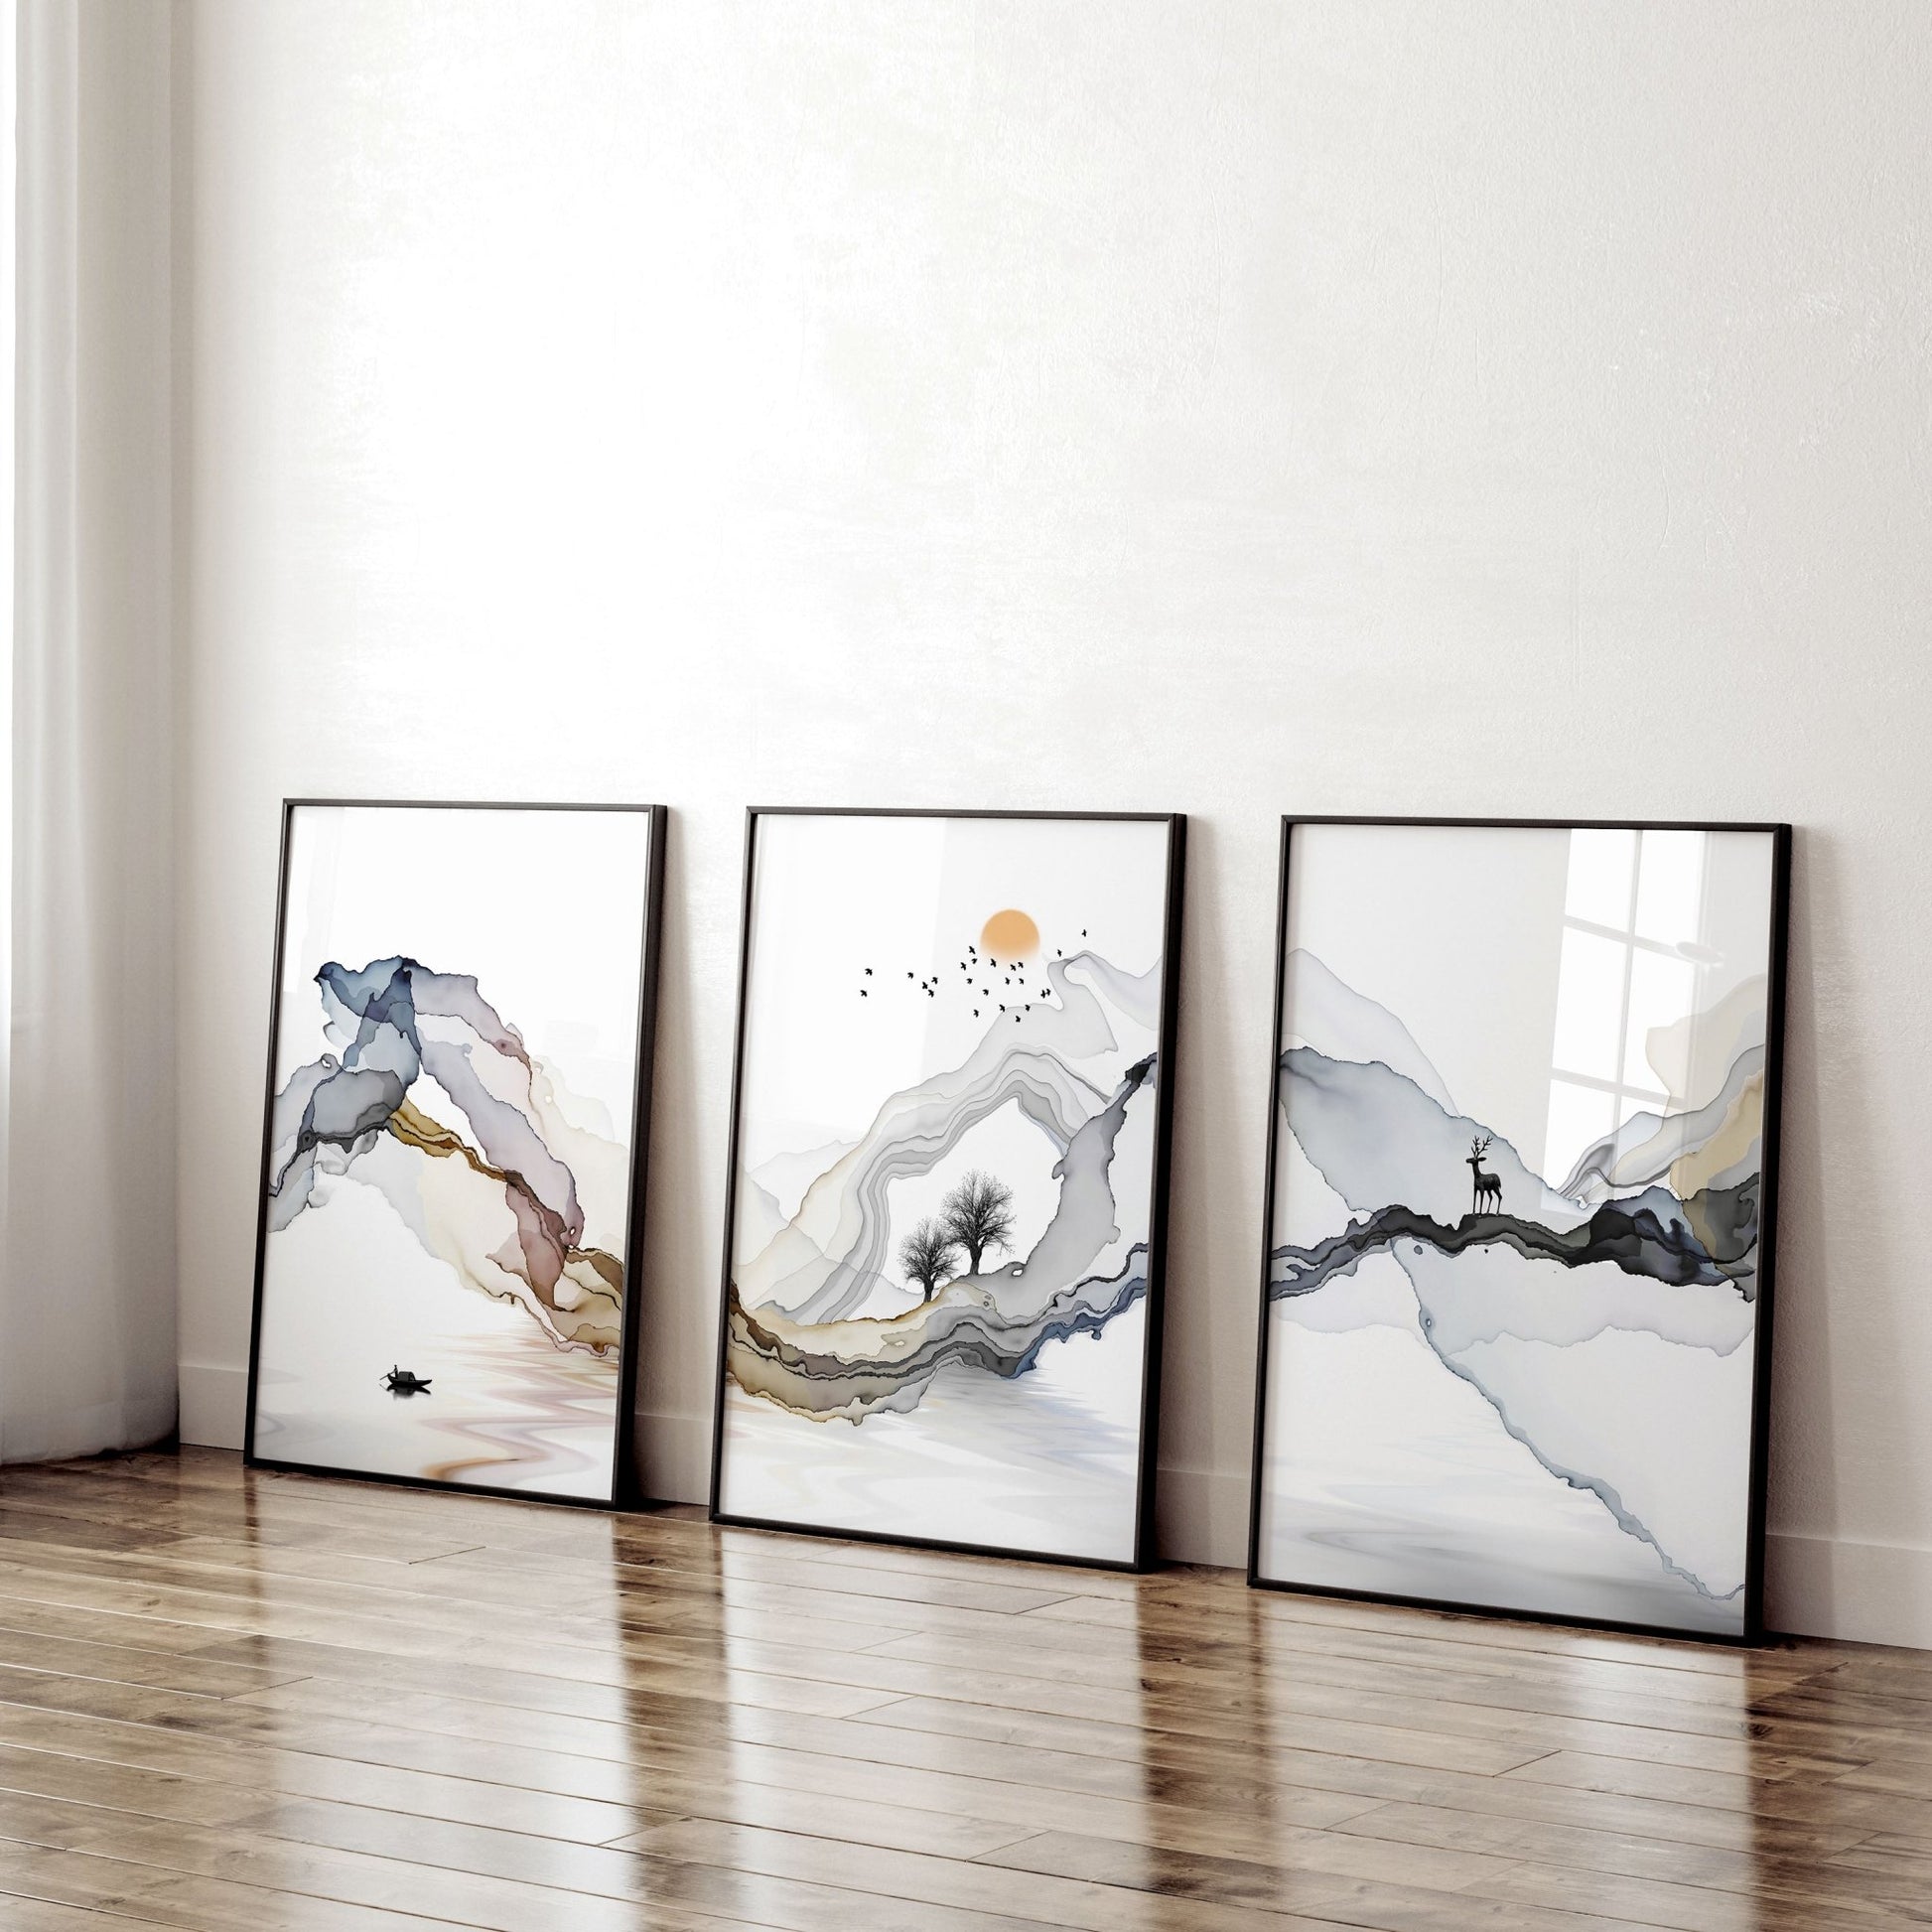 Home office wall decor | set of 3 wall art prints - About Wall Art